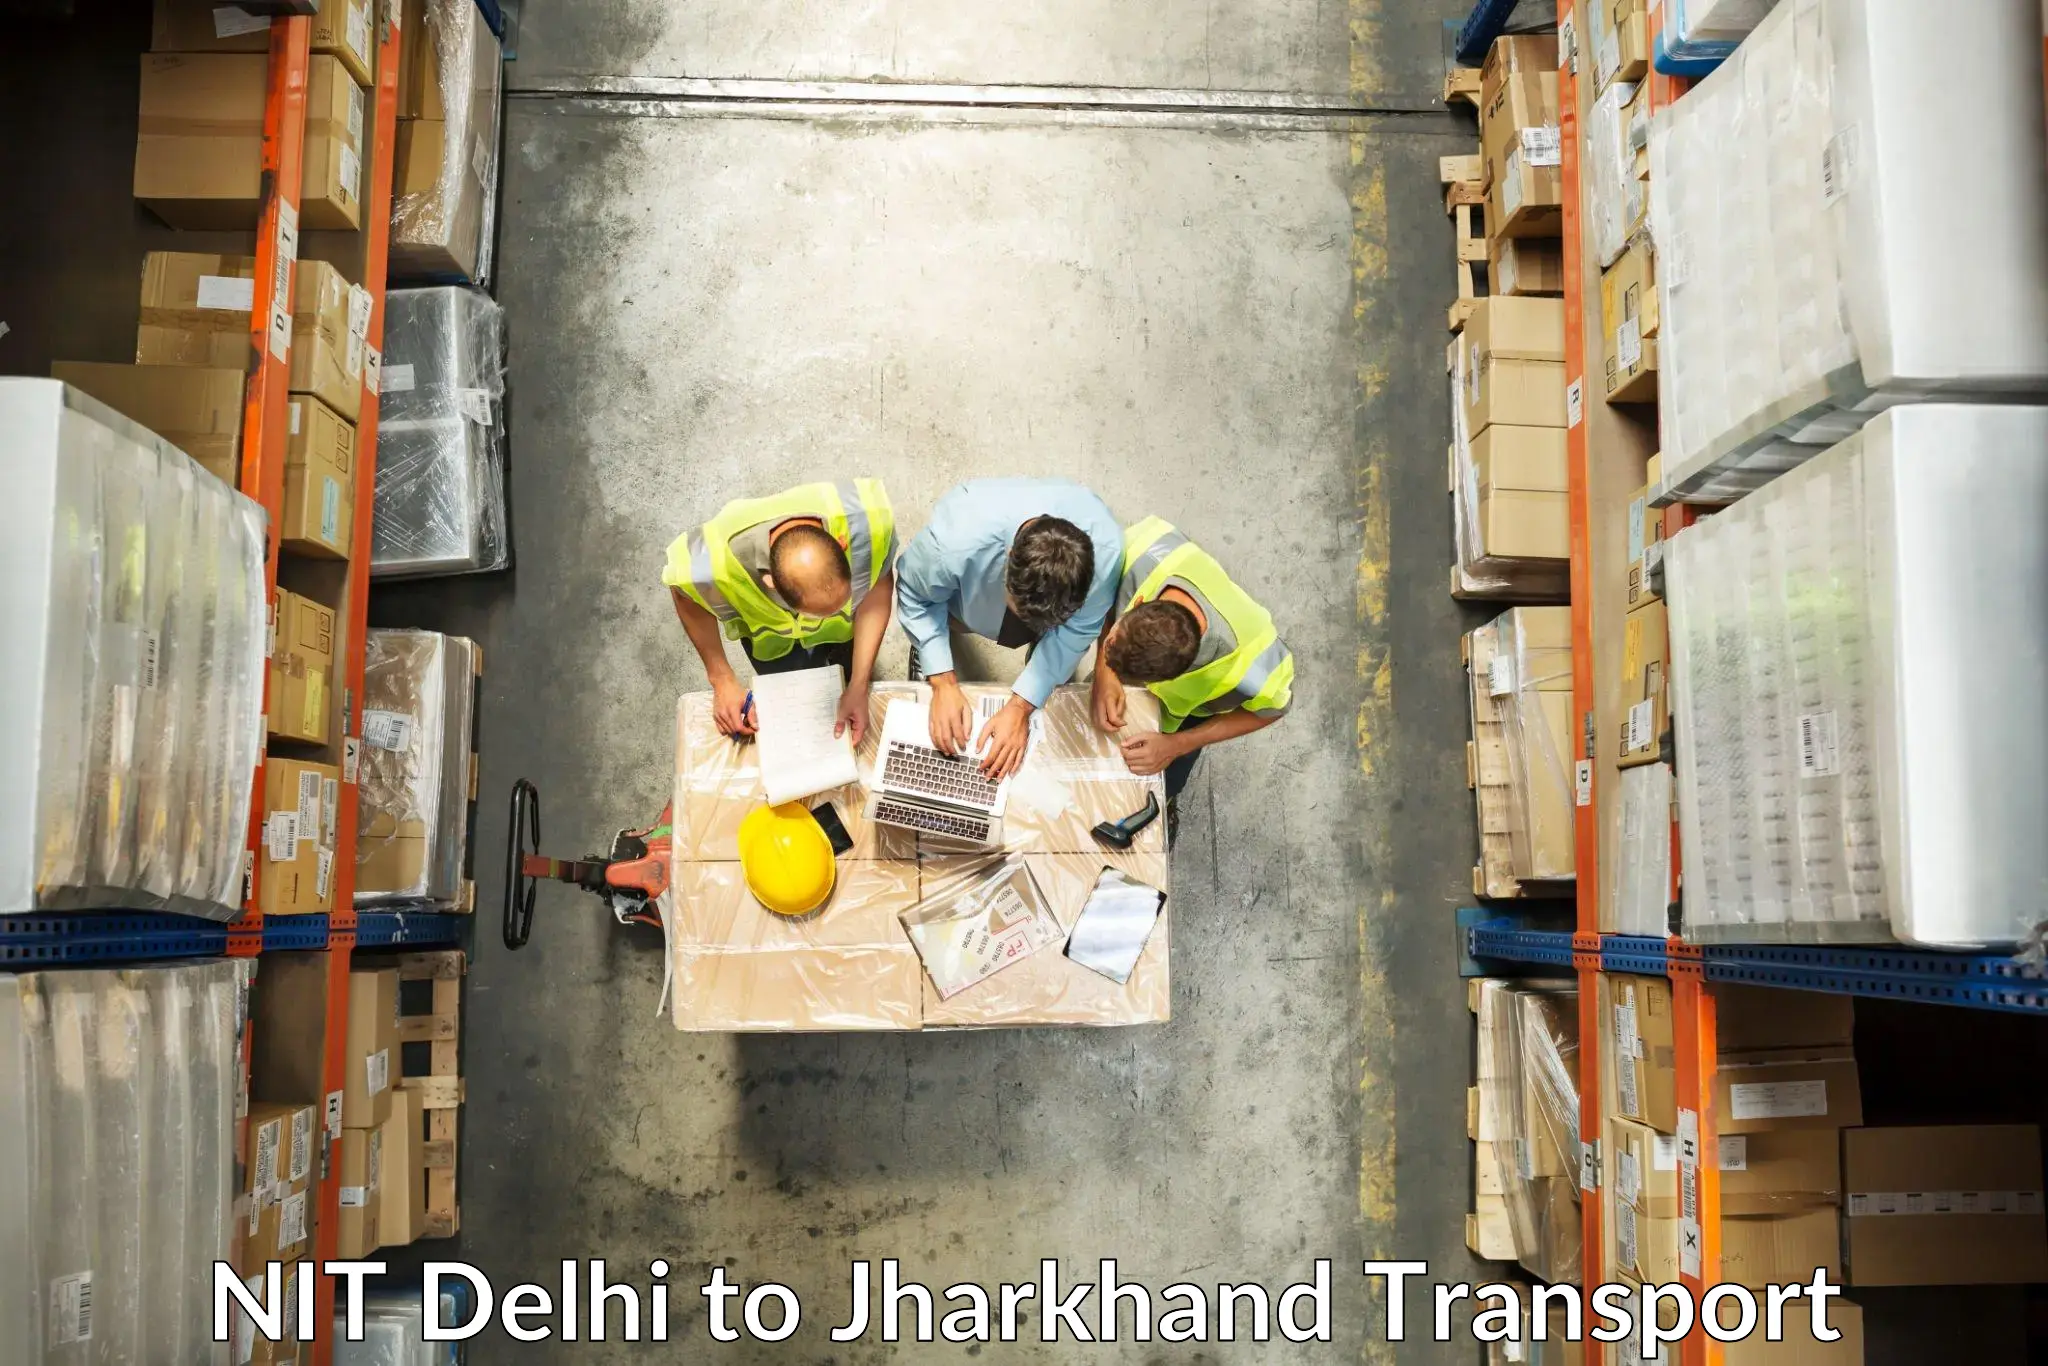 Shipping services NIT Delhi to Jamshedpur